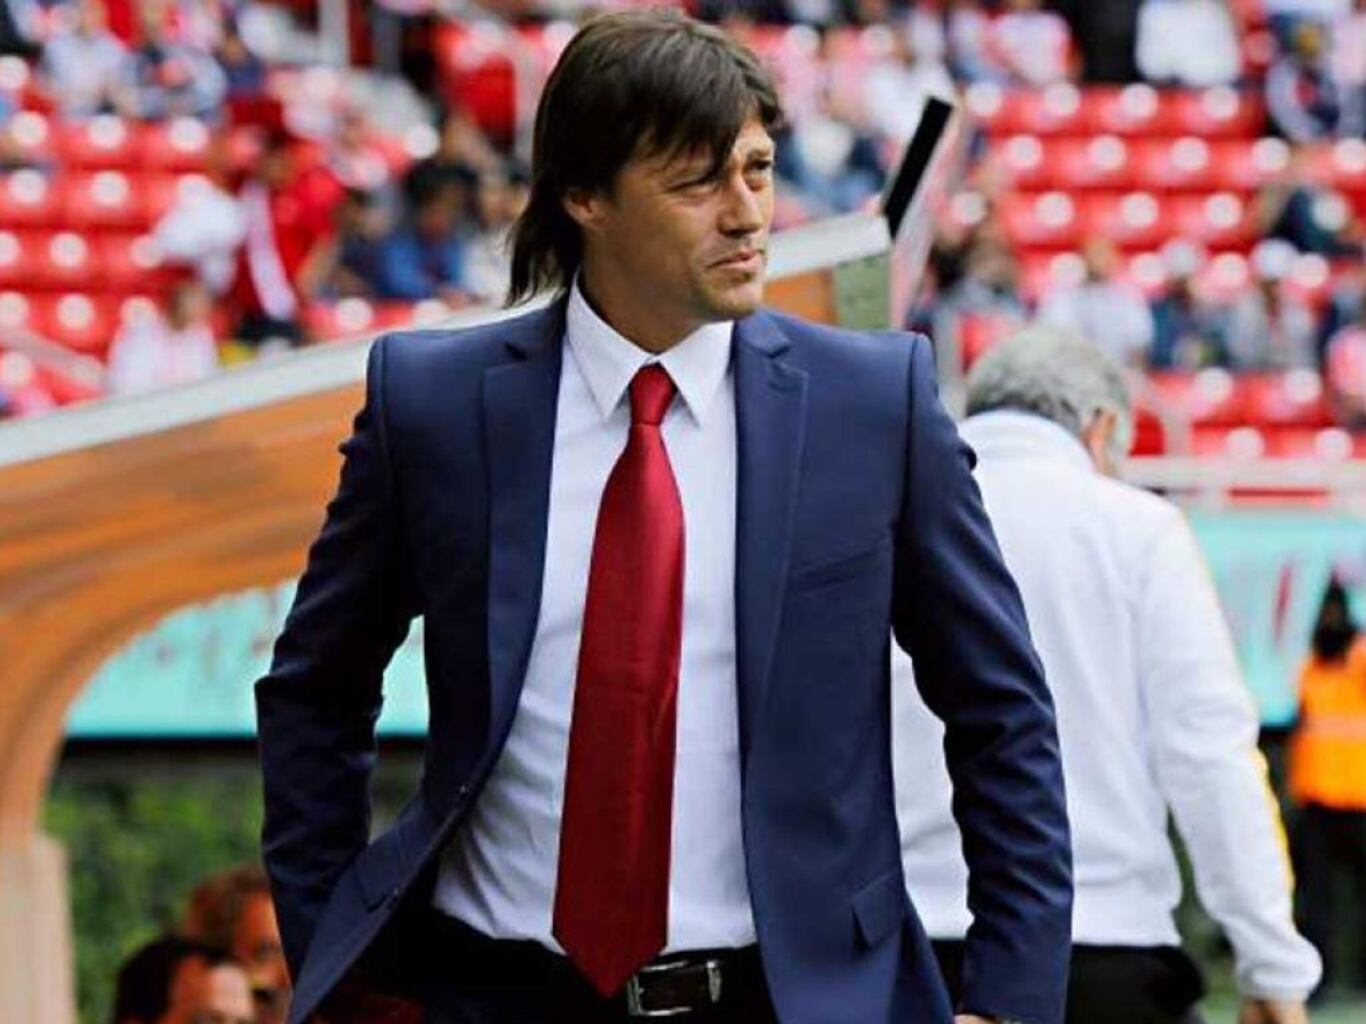 Almeyda is after another Mexican player to join him on San Jose Earthquakes